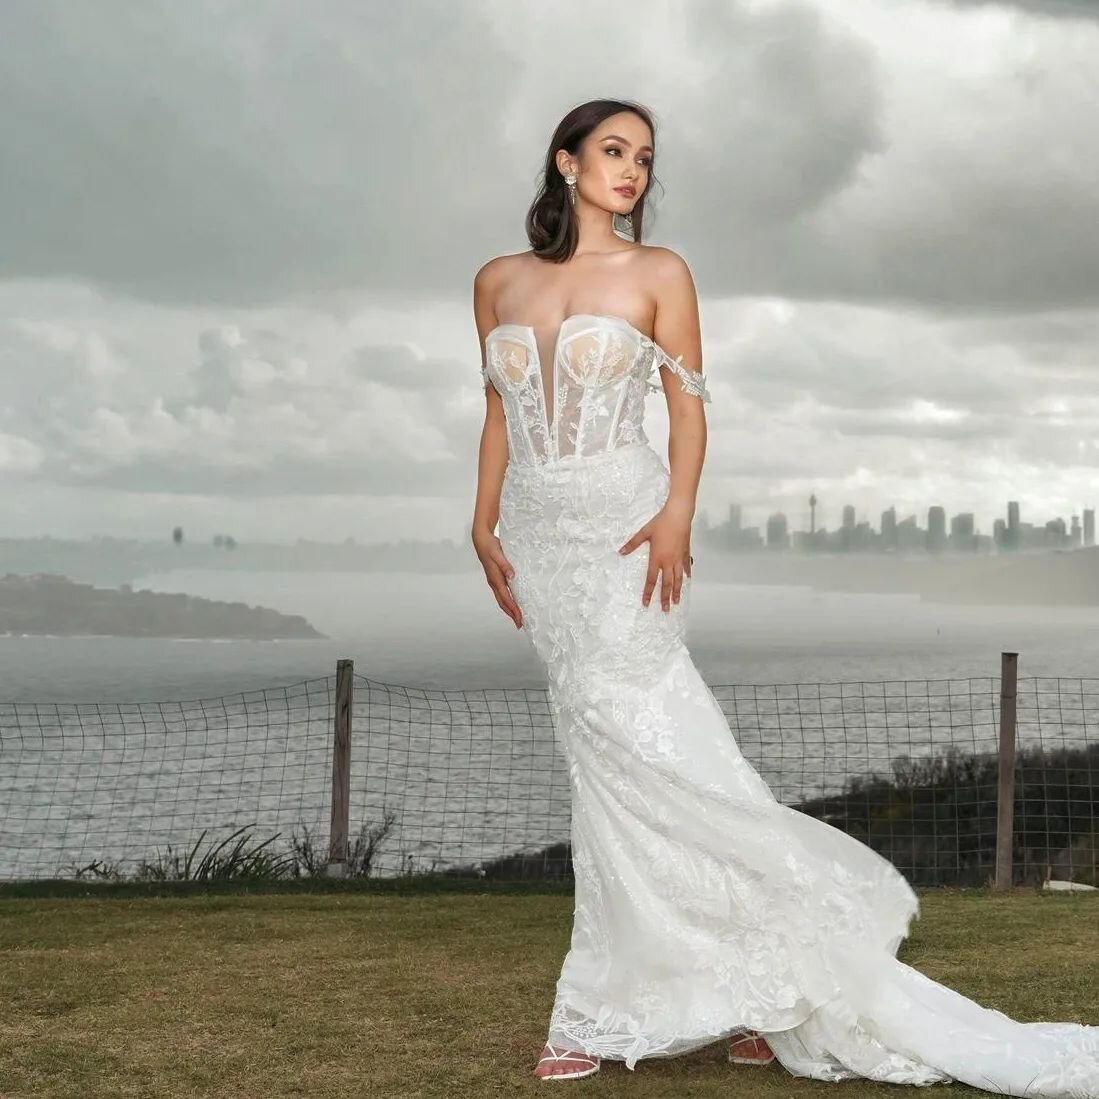 Do you know we can customise your dream dress based on our existing designs? ✨️ E.g. Addtion of sleeves, higher neckline, longer train, etc. 

Book your appointment now to see our latest collection 👰

Photo @perfect10imageau
Makeup @carlapaesofficia